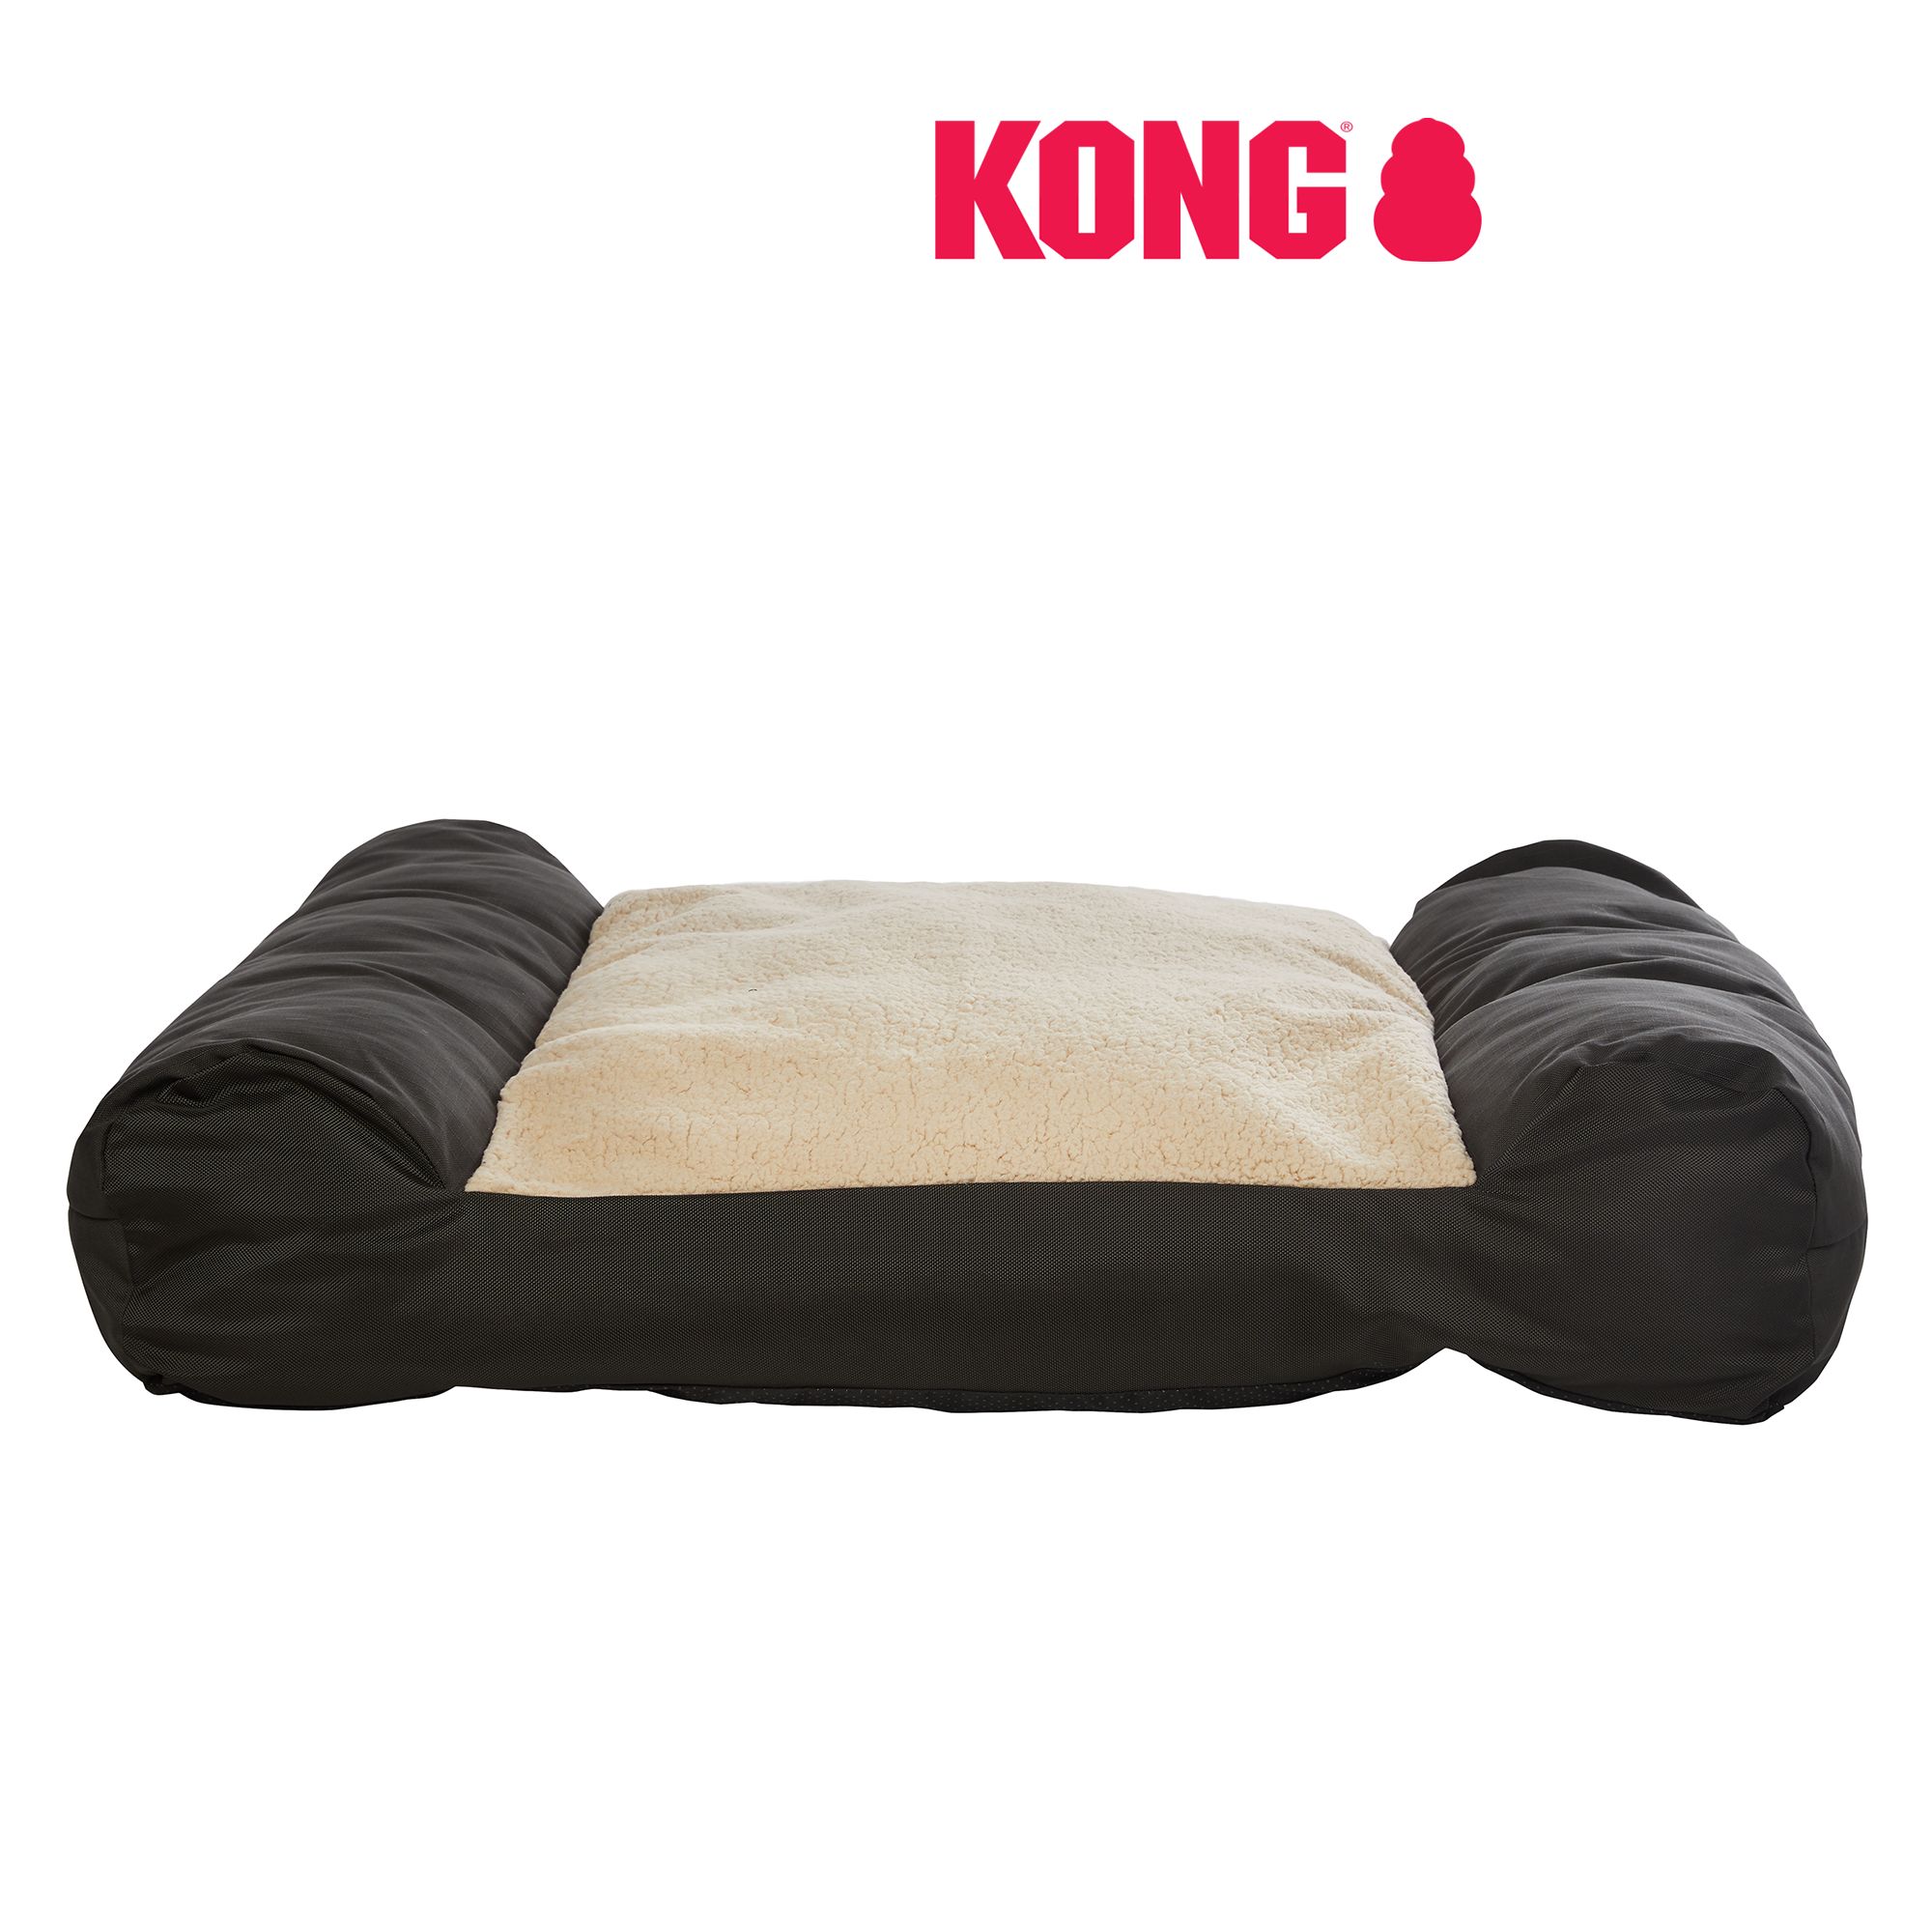 kong bed inserts